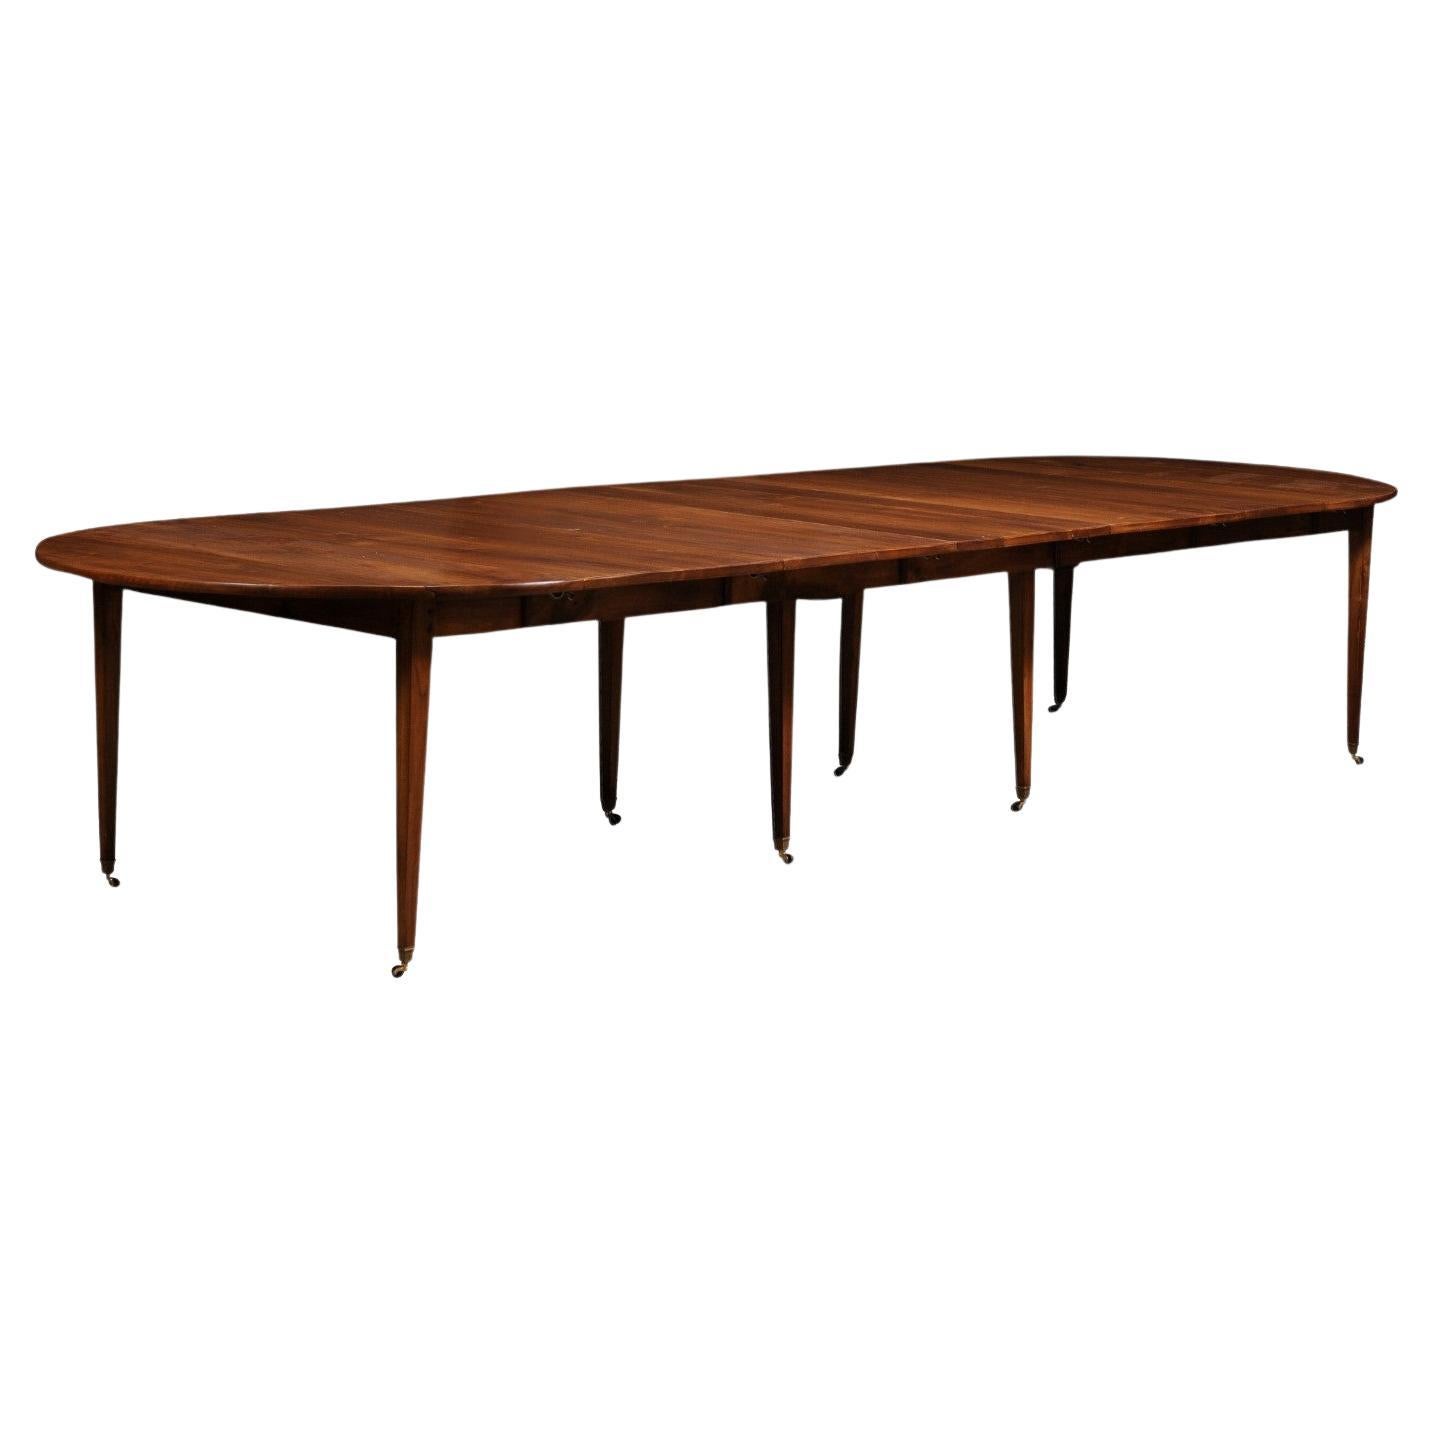 French Turn of the Century 1900s Walnut Extension Dining Table With Five Leaves